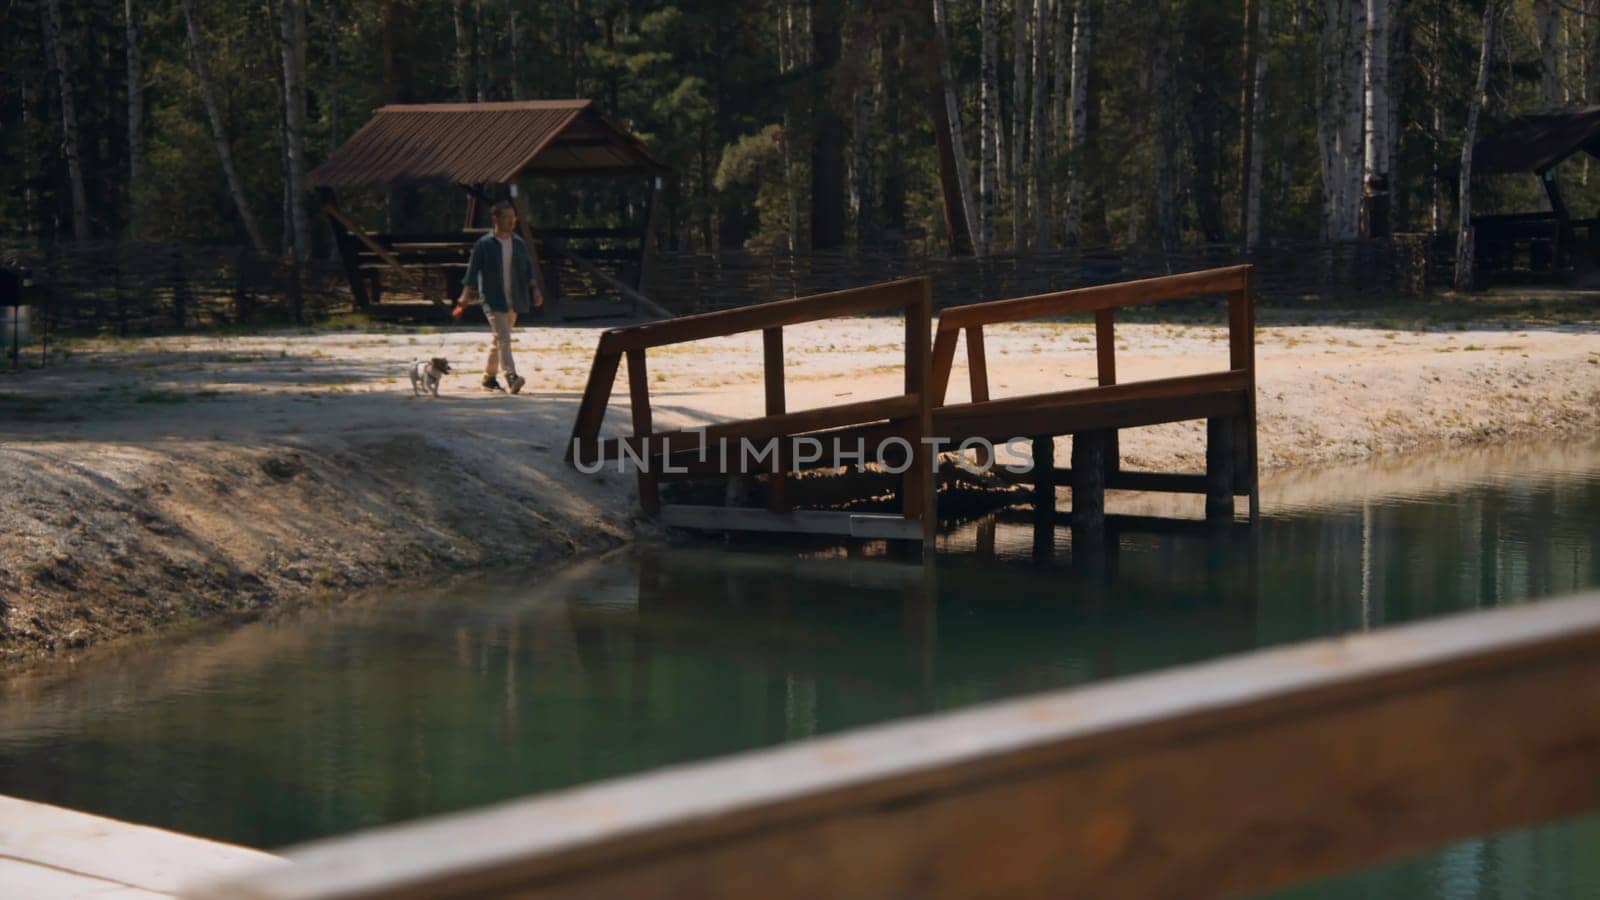 Man walks with dog at pier of lake. Stock footage. Man brought dog to pier by pond in forest. Man walks with dog at recreation center by lake in summer.